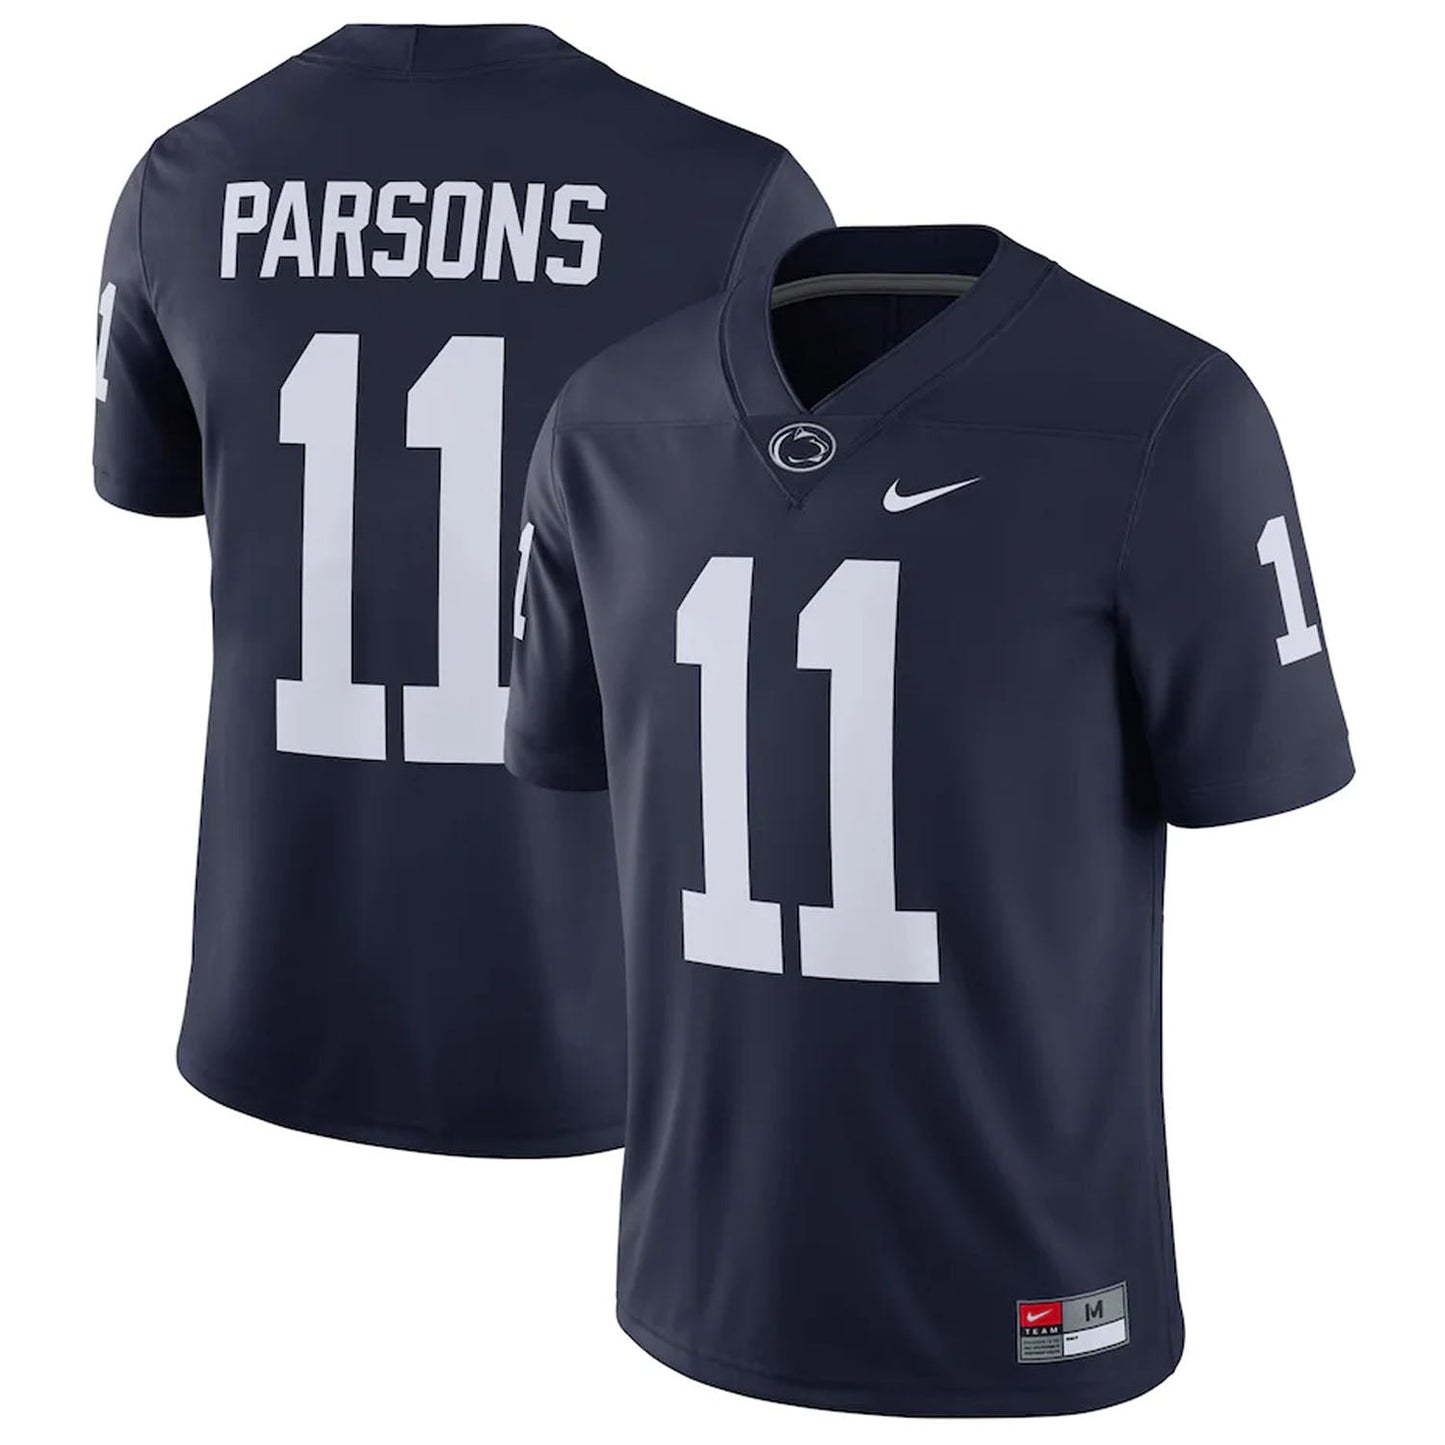 NCAAF Micah Parsons Penn State Nittany Lions 11 Jersey